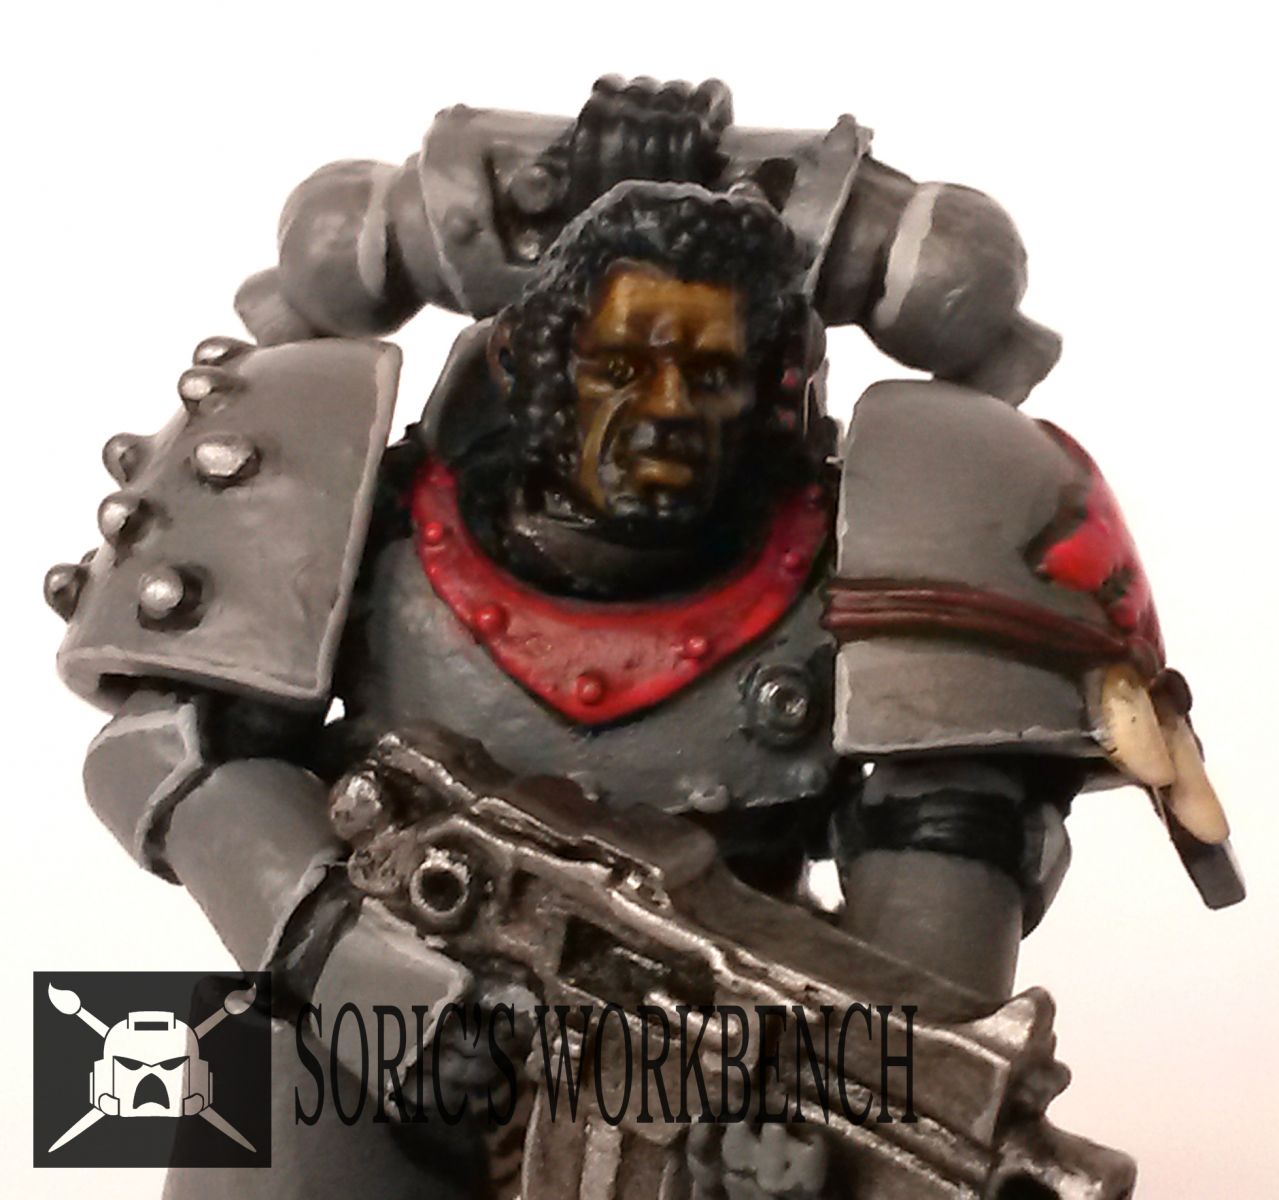 Horus Heresy Space Wolf face detail